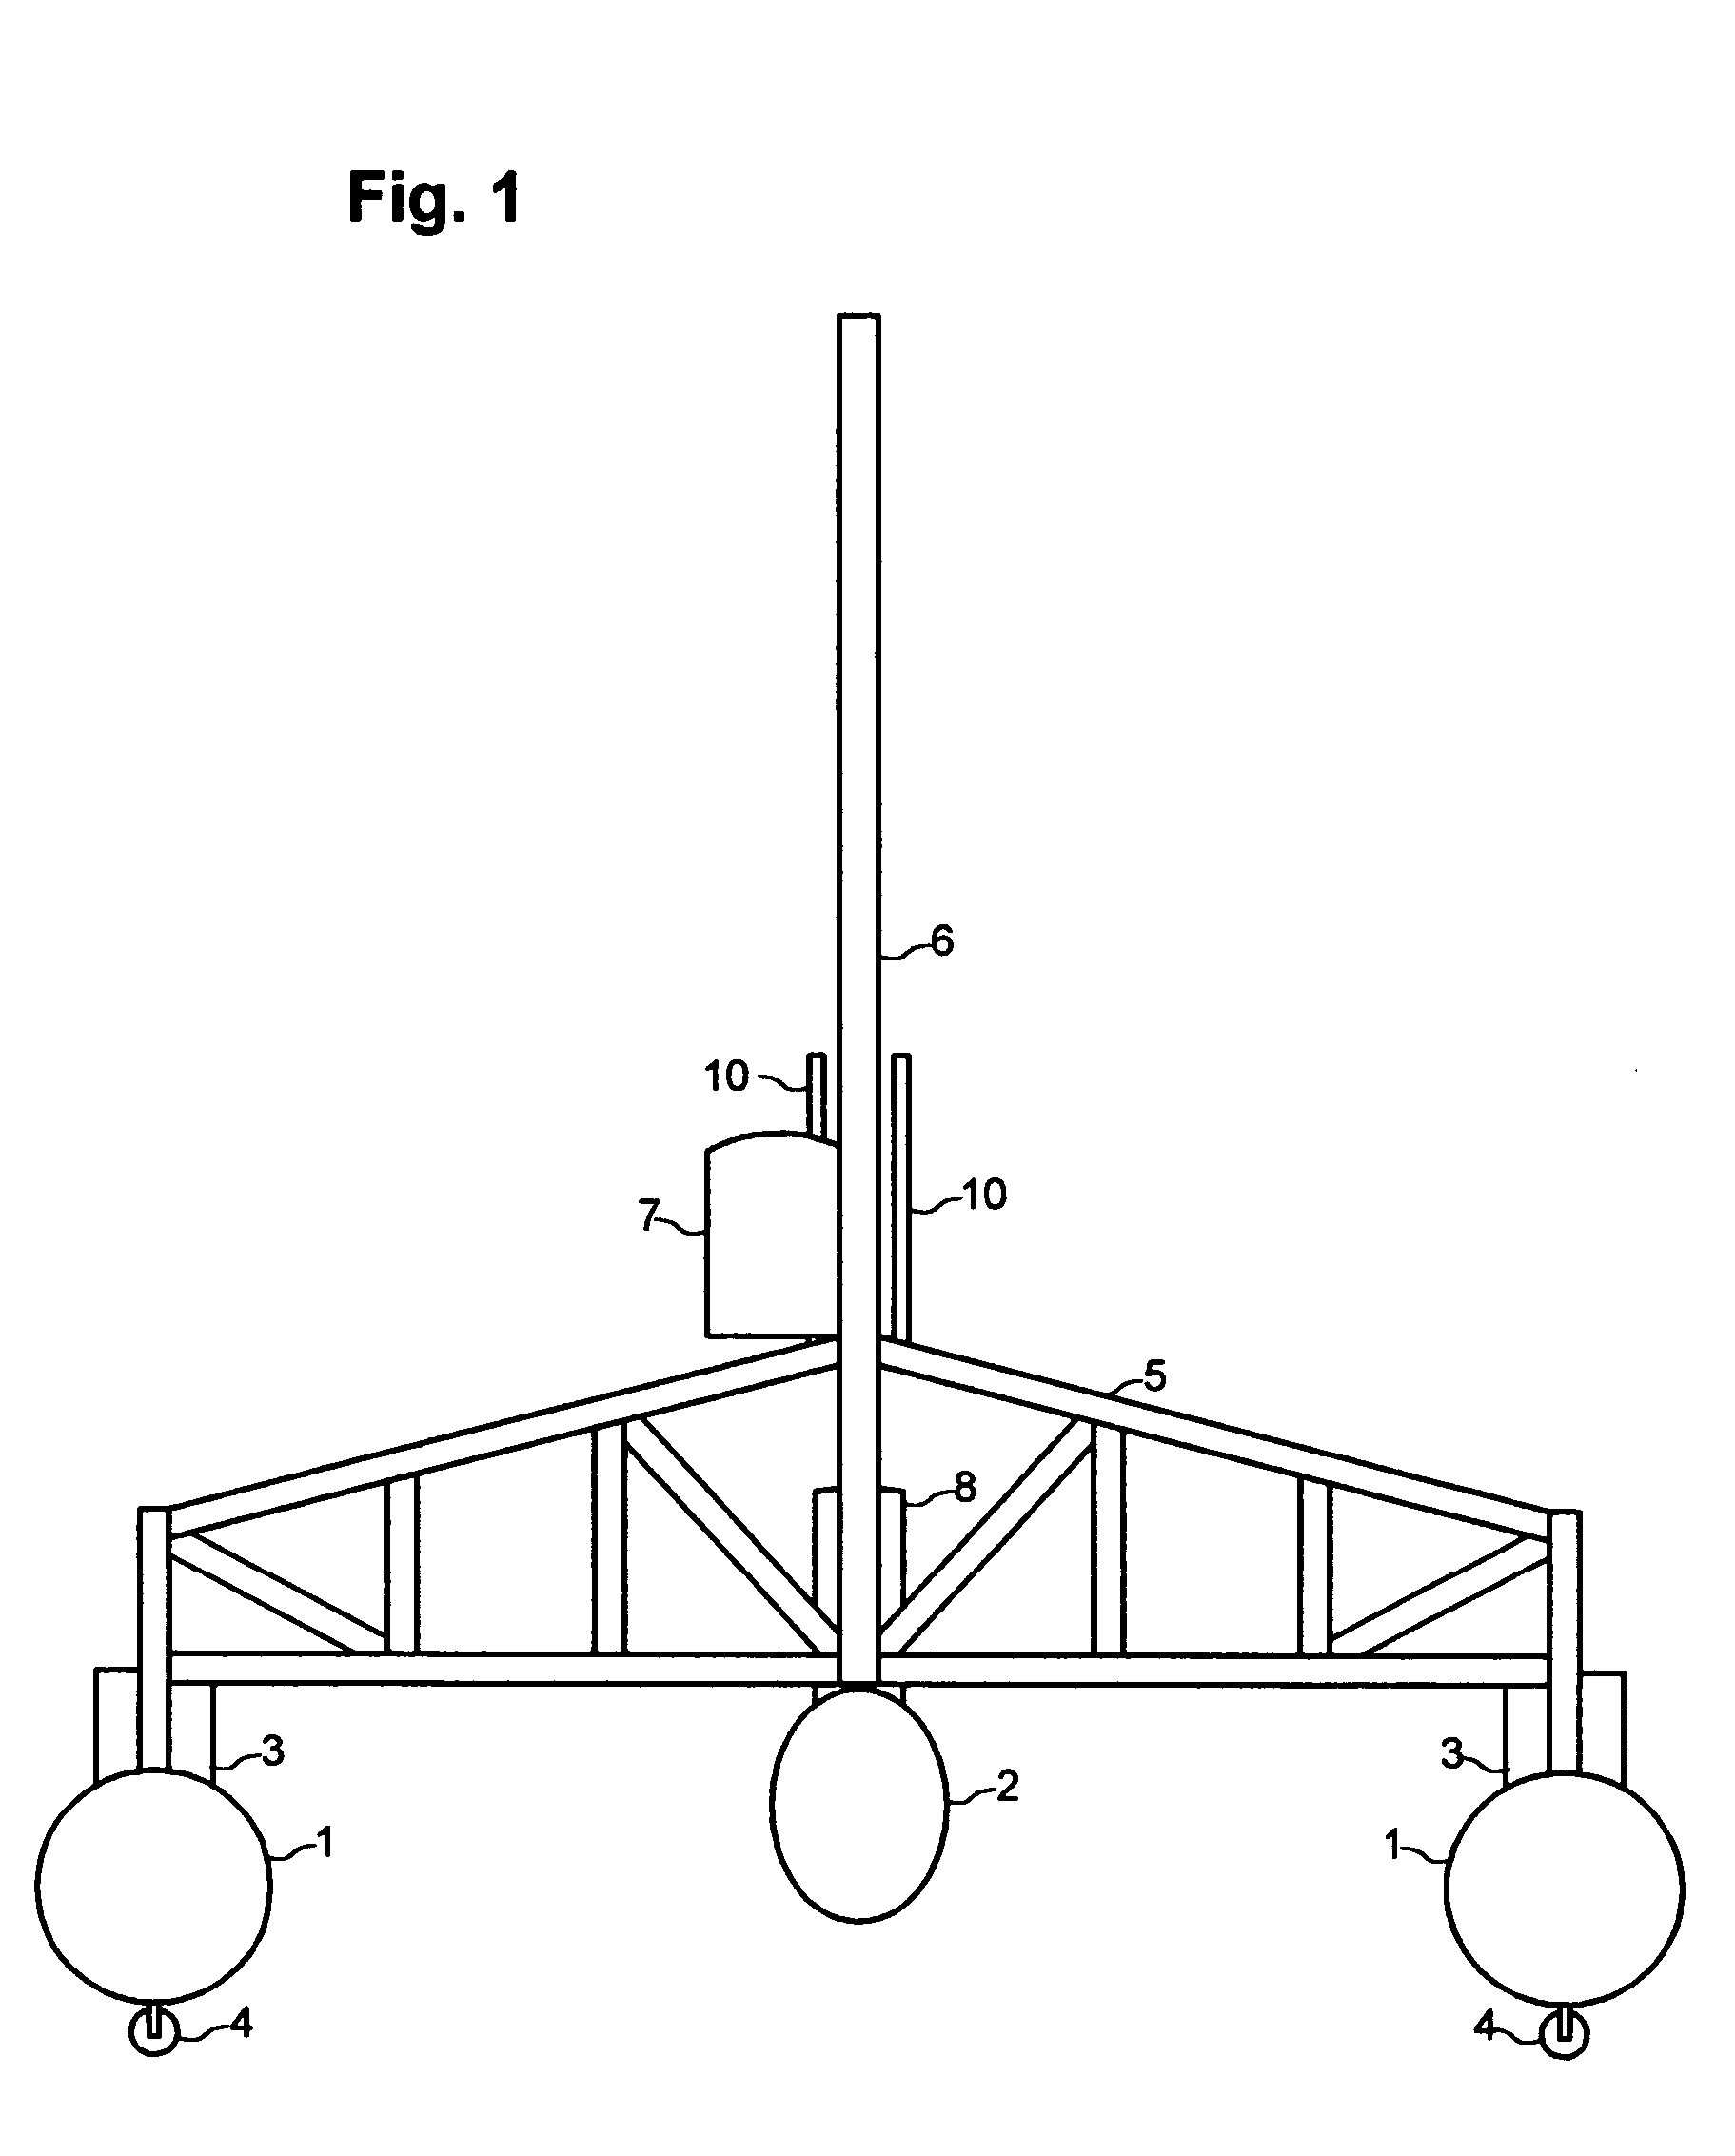 Surface vessel with submersible passenger compartment